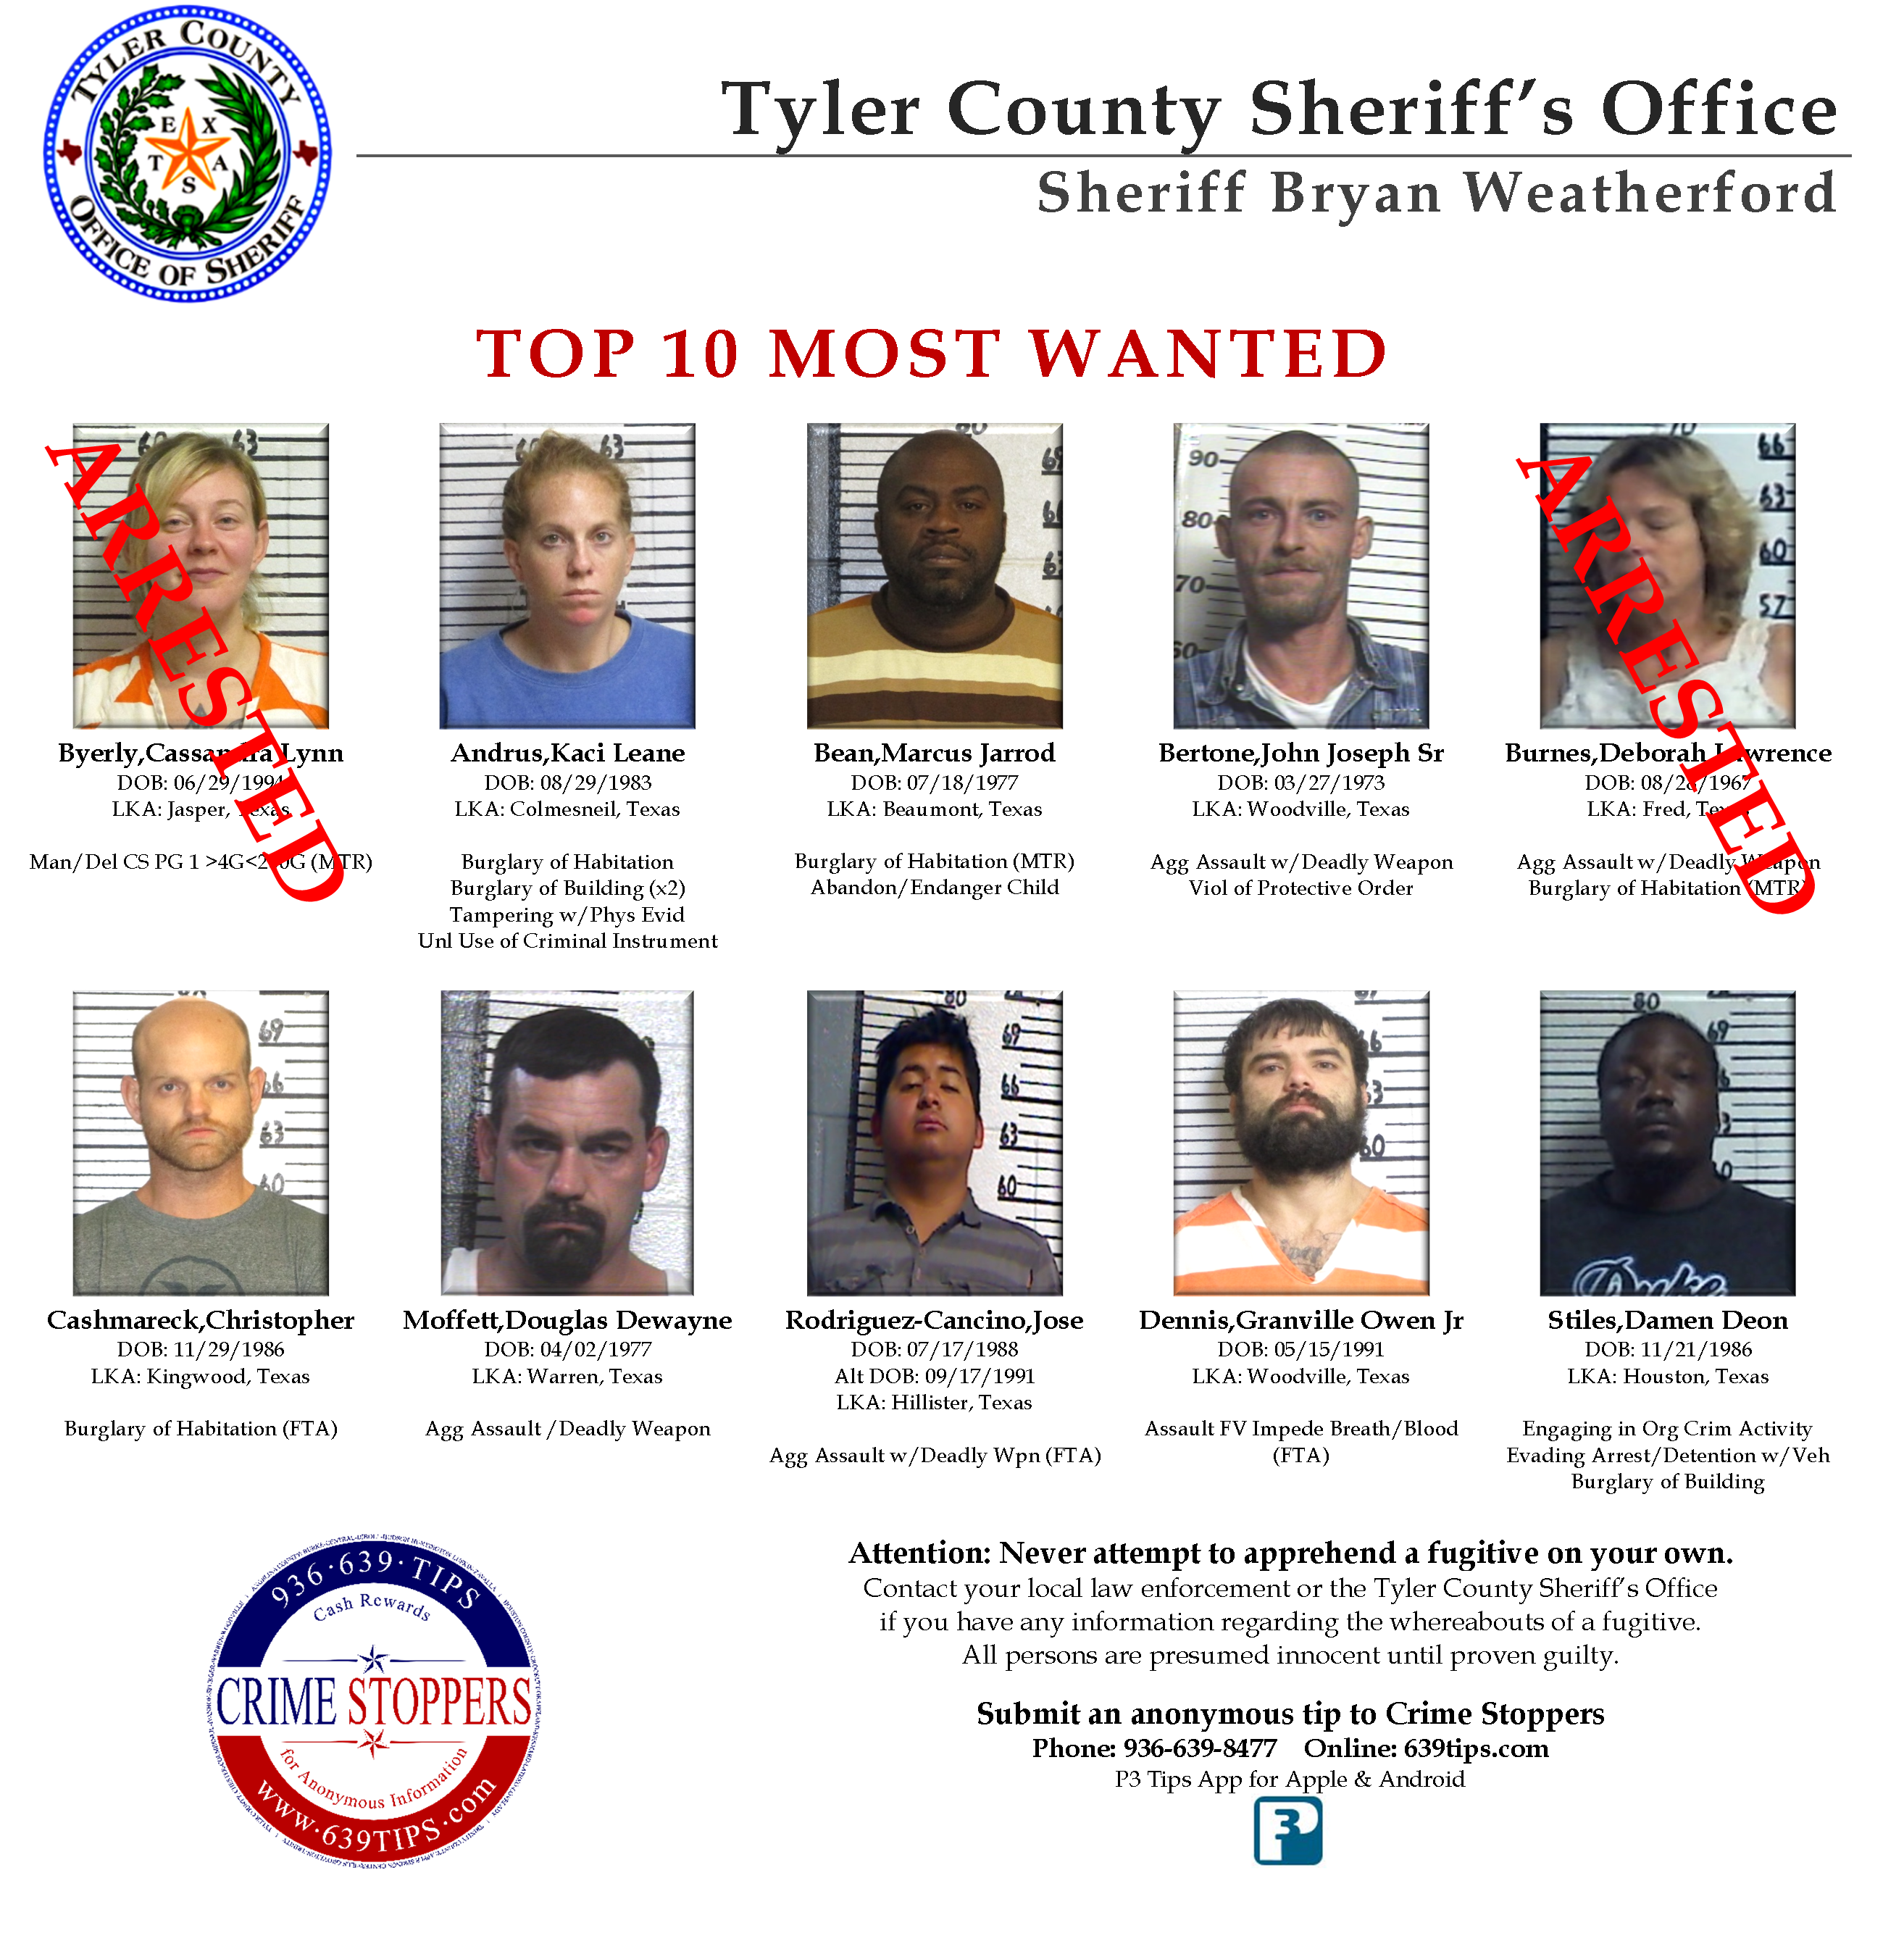 Top 10 Most Wanted